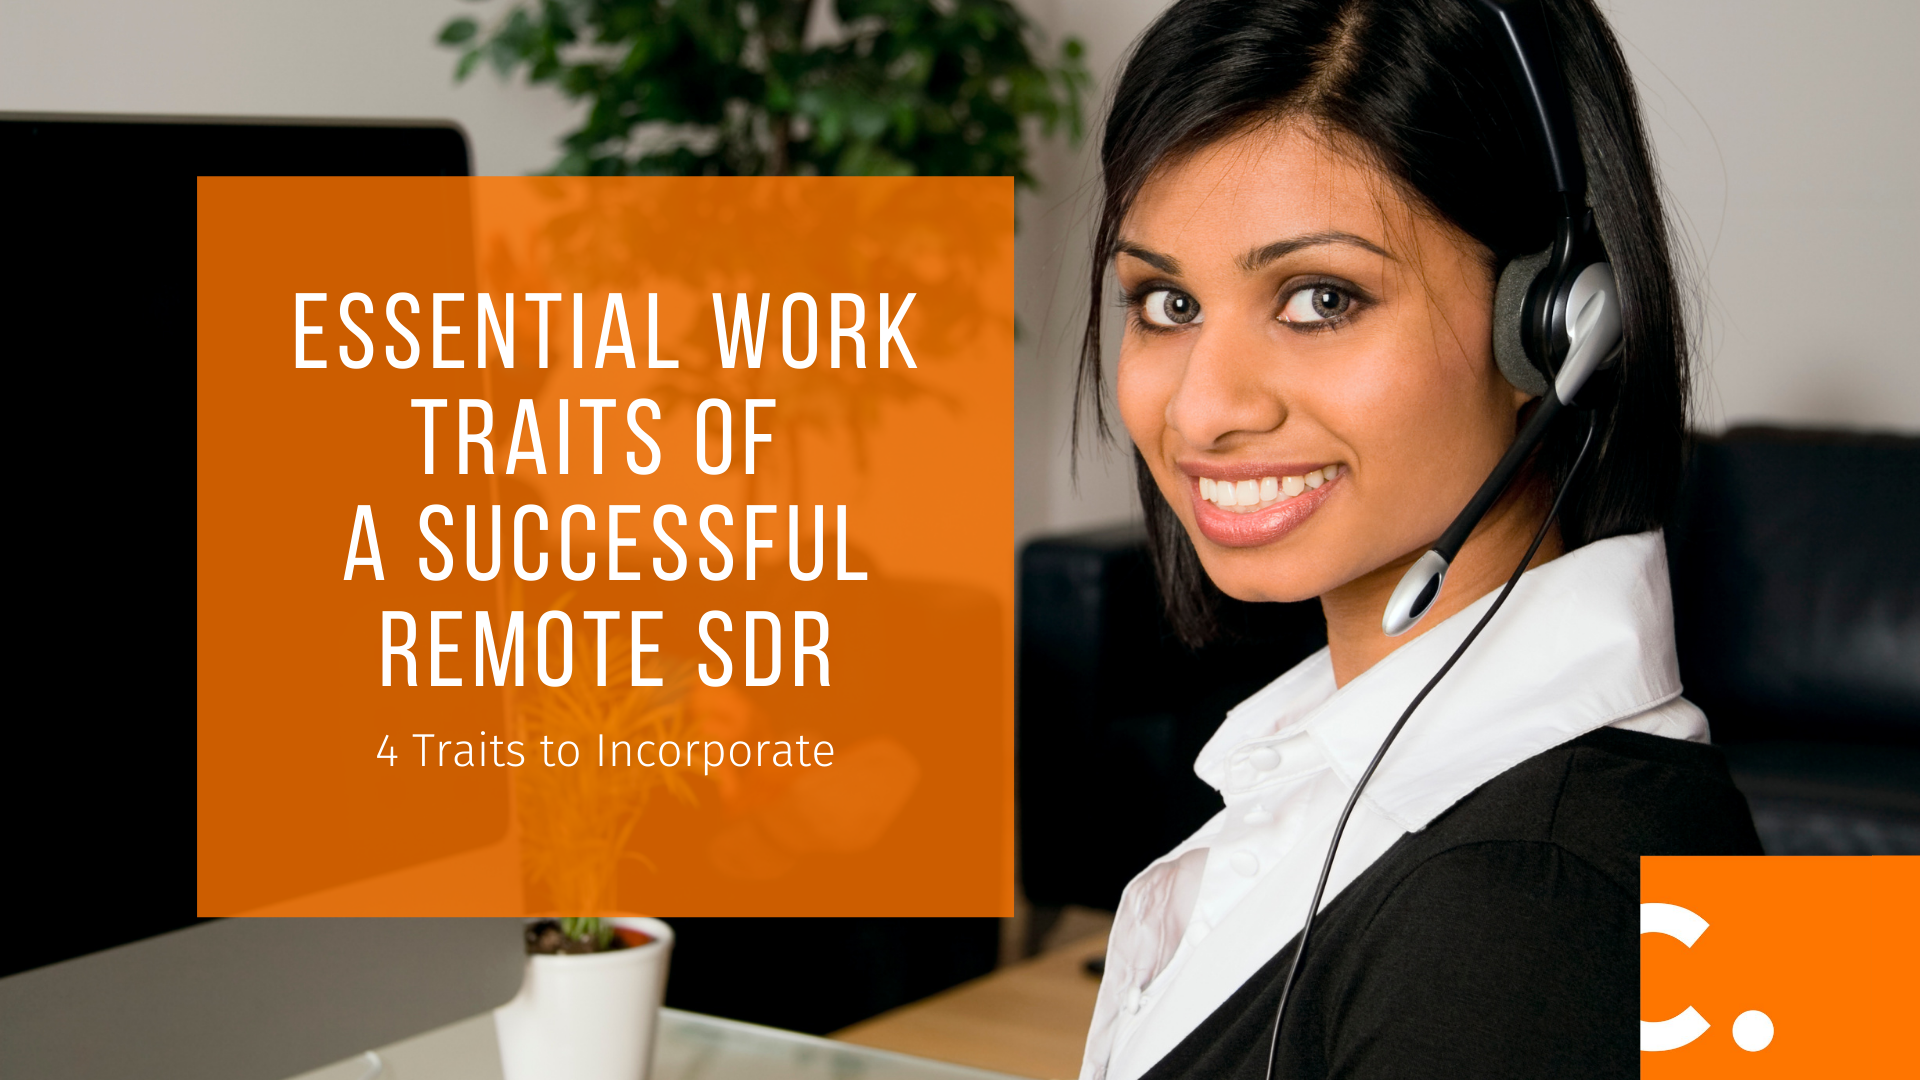 Read some essential traits of successful remote SDRs